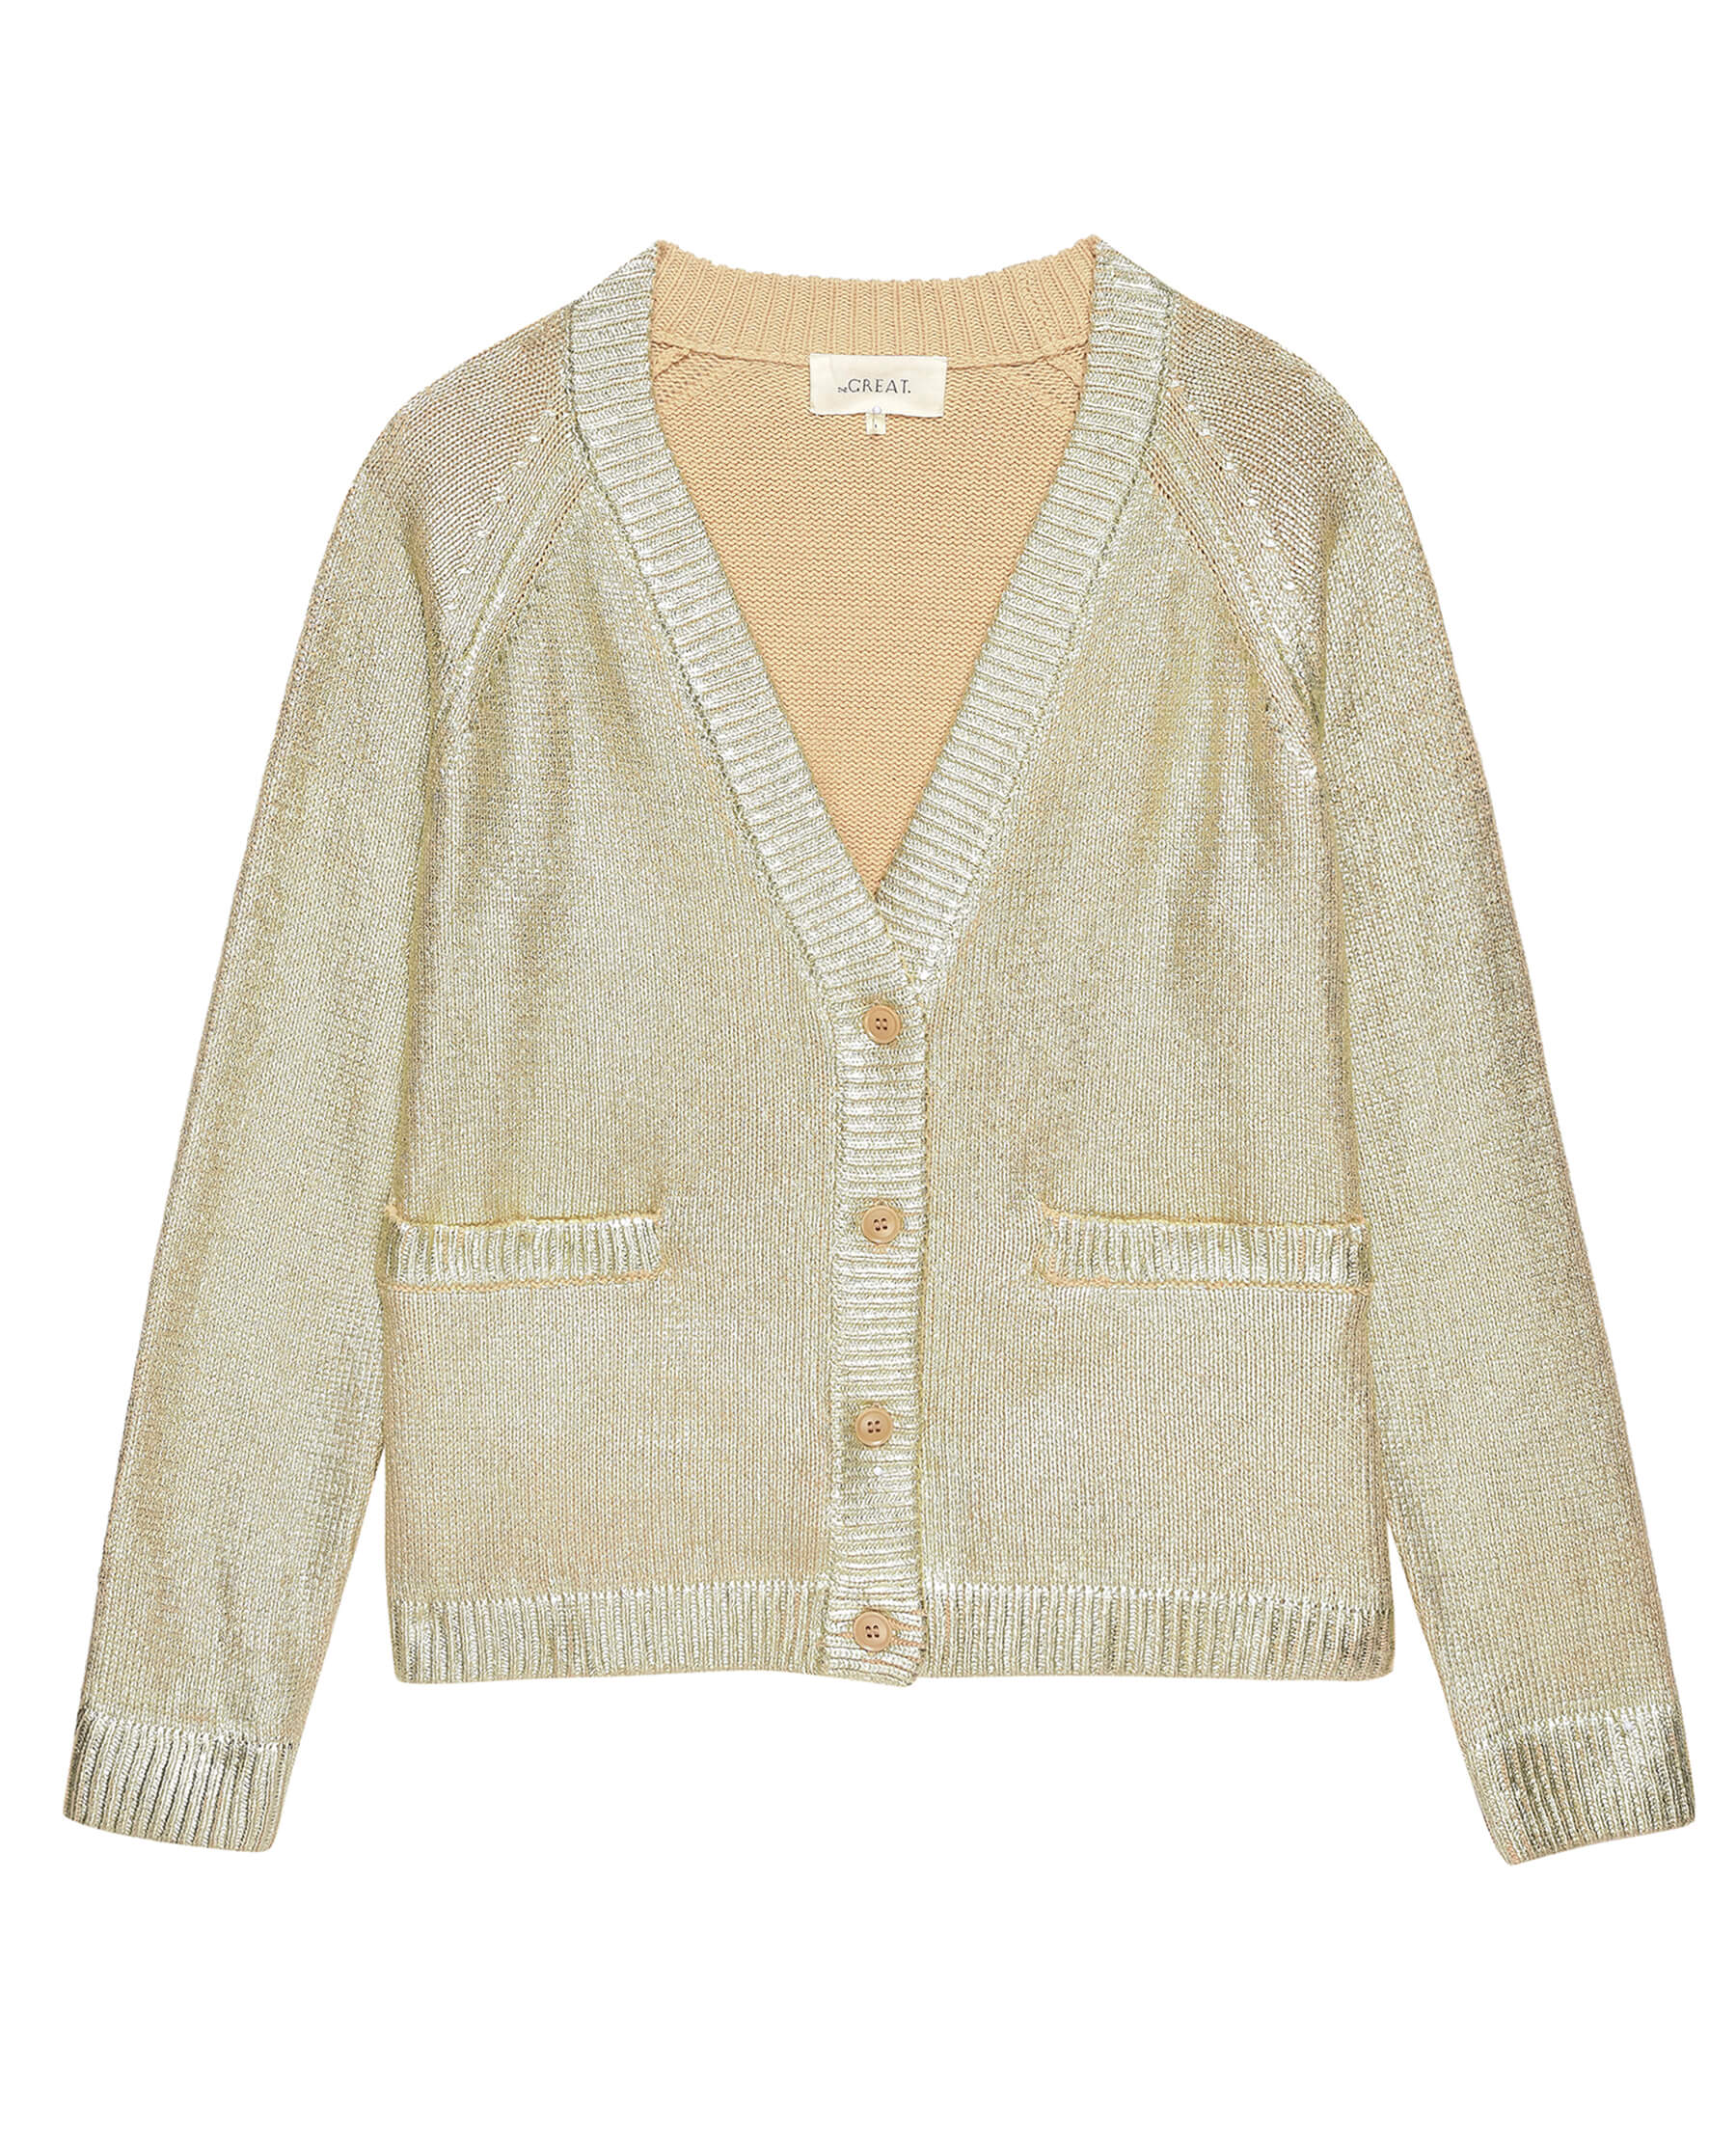 The Varsity Cardigan. -- Shimmer SWEATERS THE GREAT. HOL 23 D1 SALE